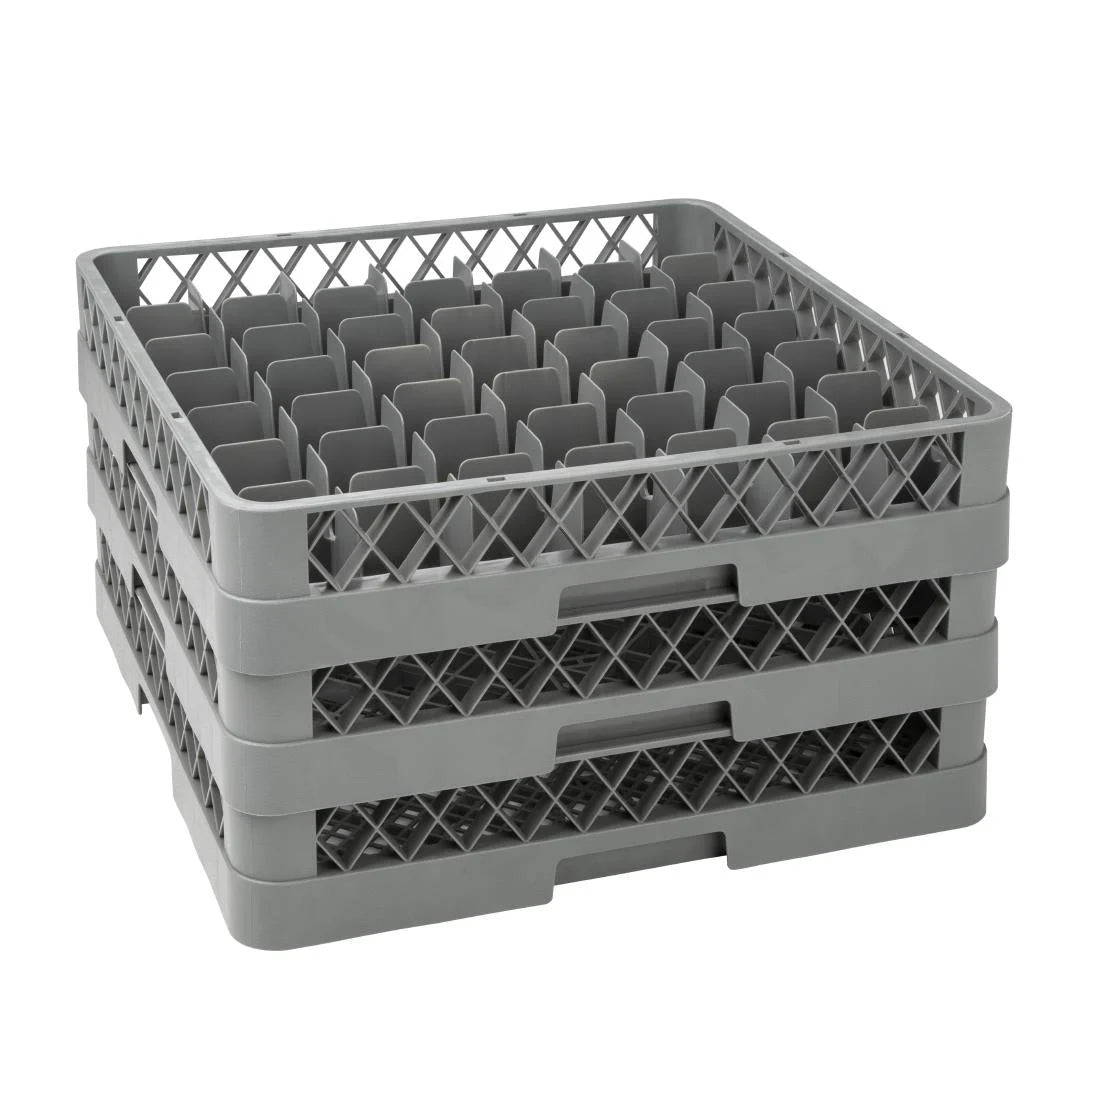 Vogue Glass Rack 49 Compartments.Product Ref:00691.Model: F615. 🚚 1-3 Days Delivery